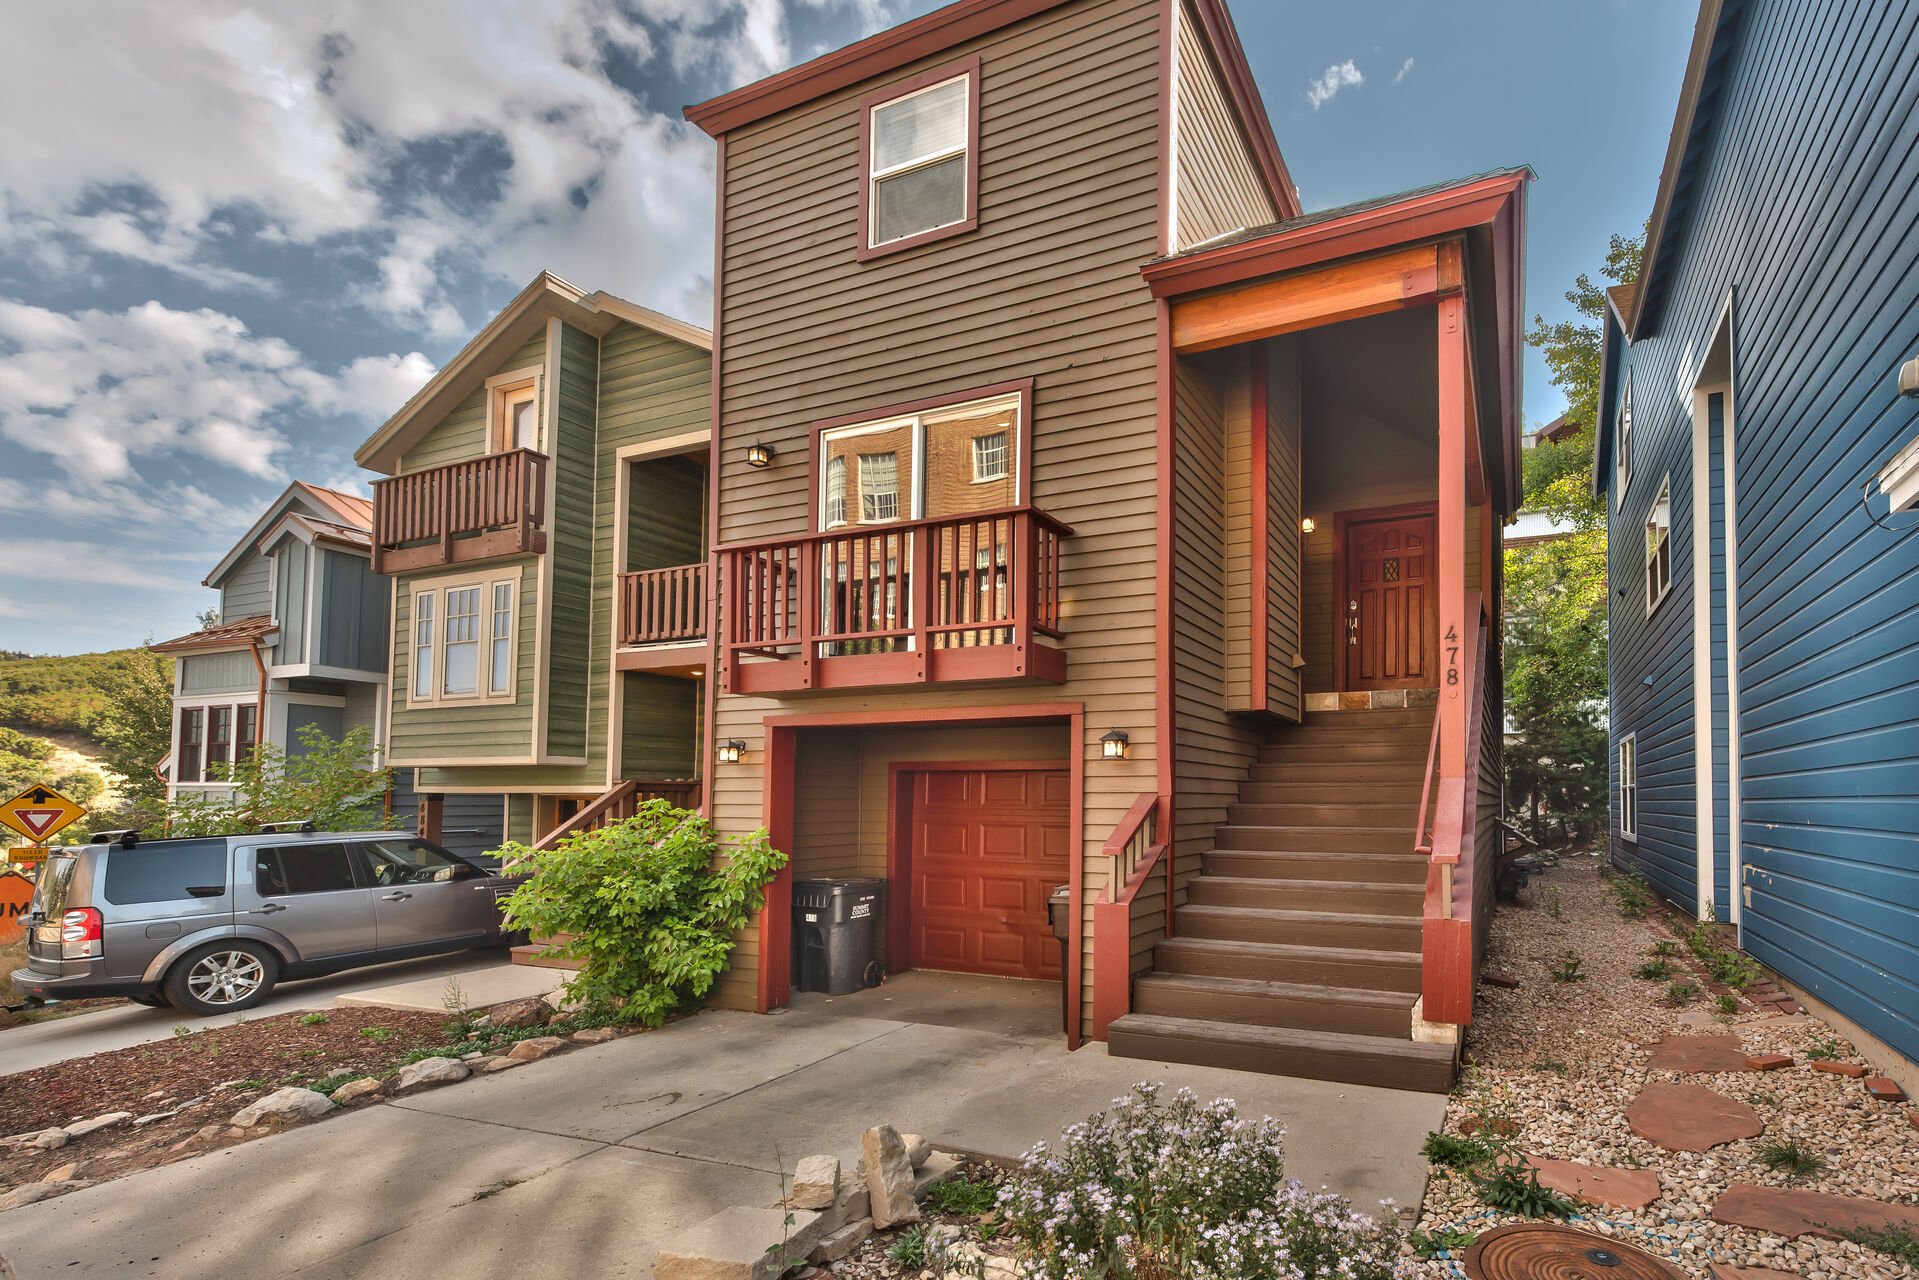 Park City Marsac Manor - 3 Bedroom / 2.5 Bath with Hot Tub In the Heart of Old Town